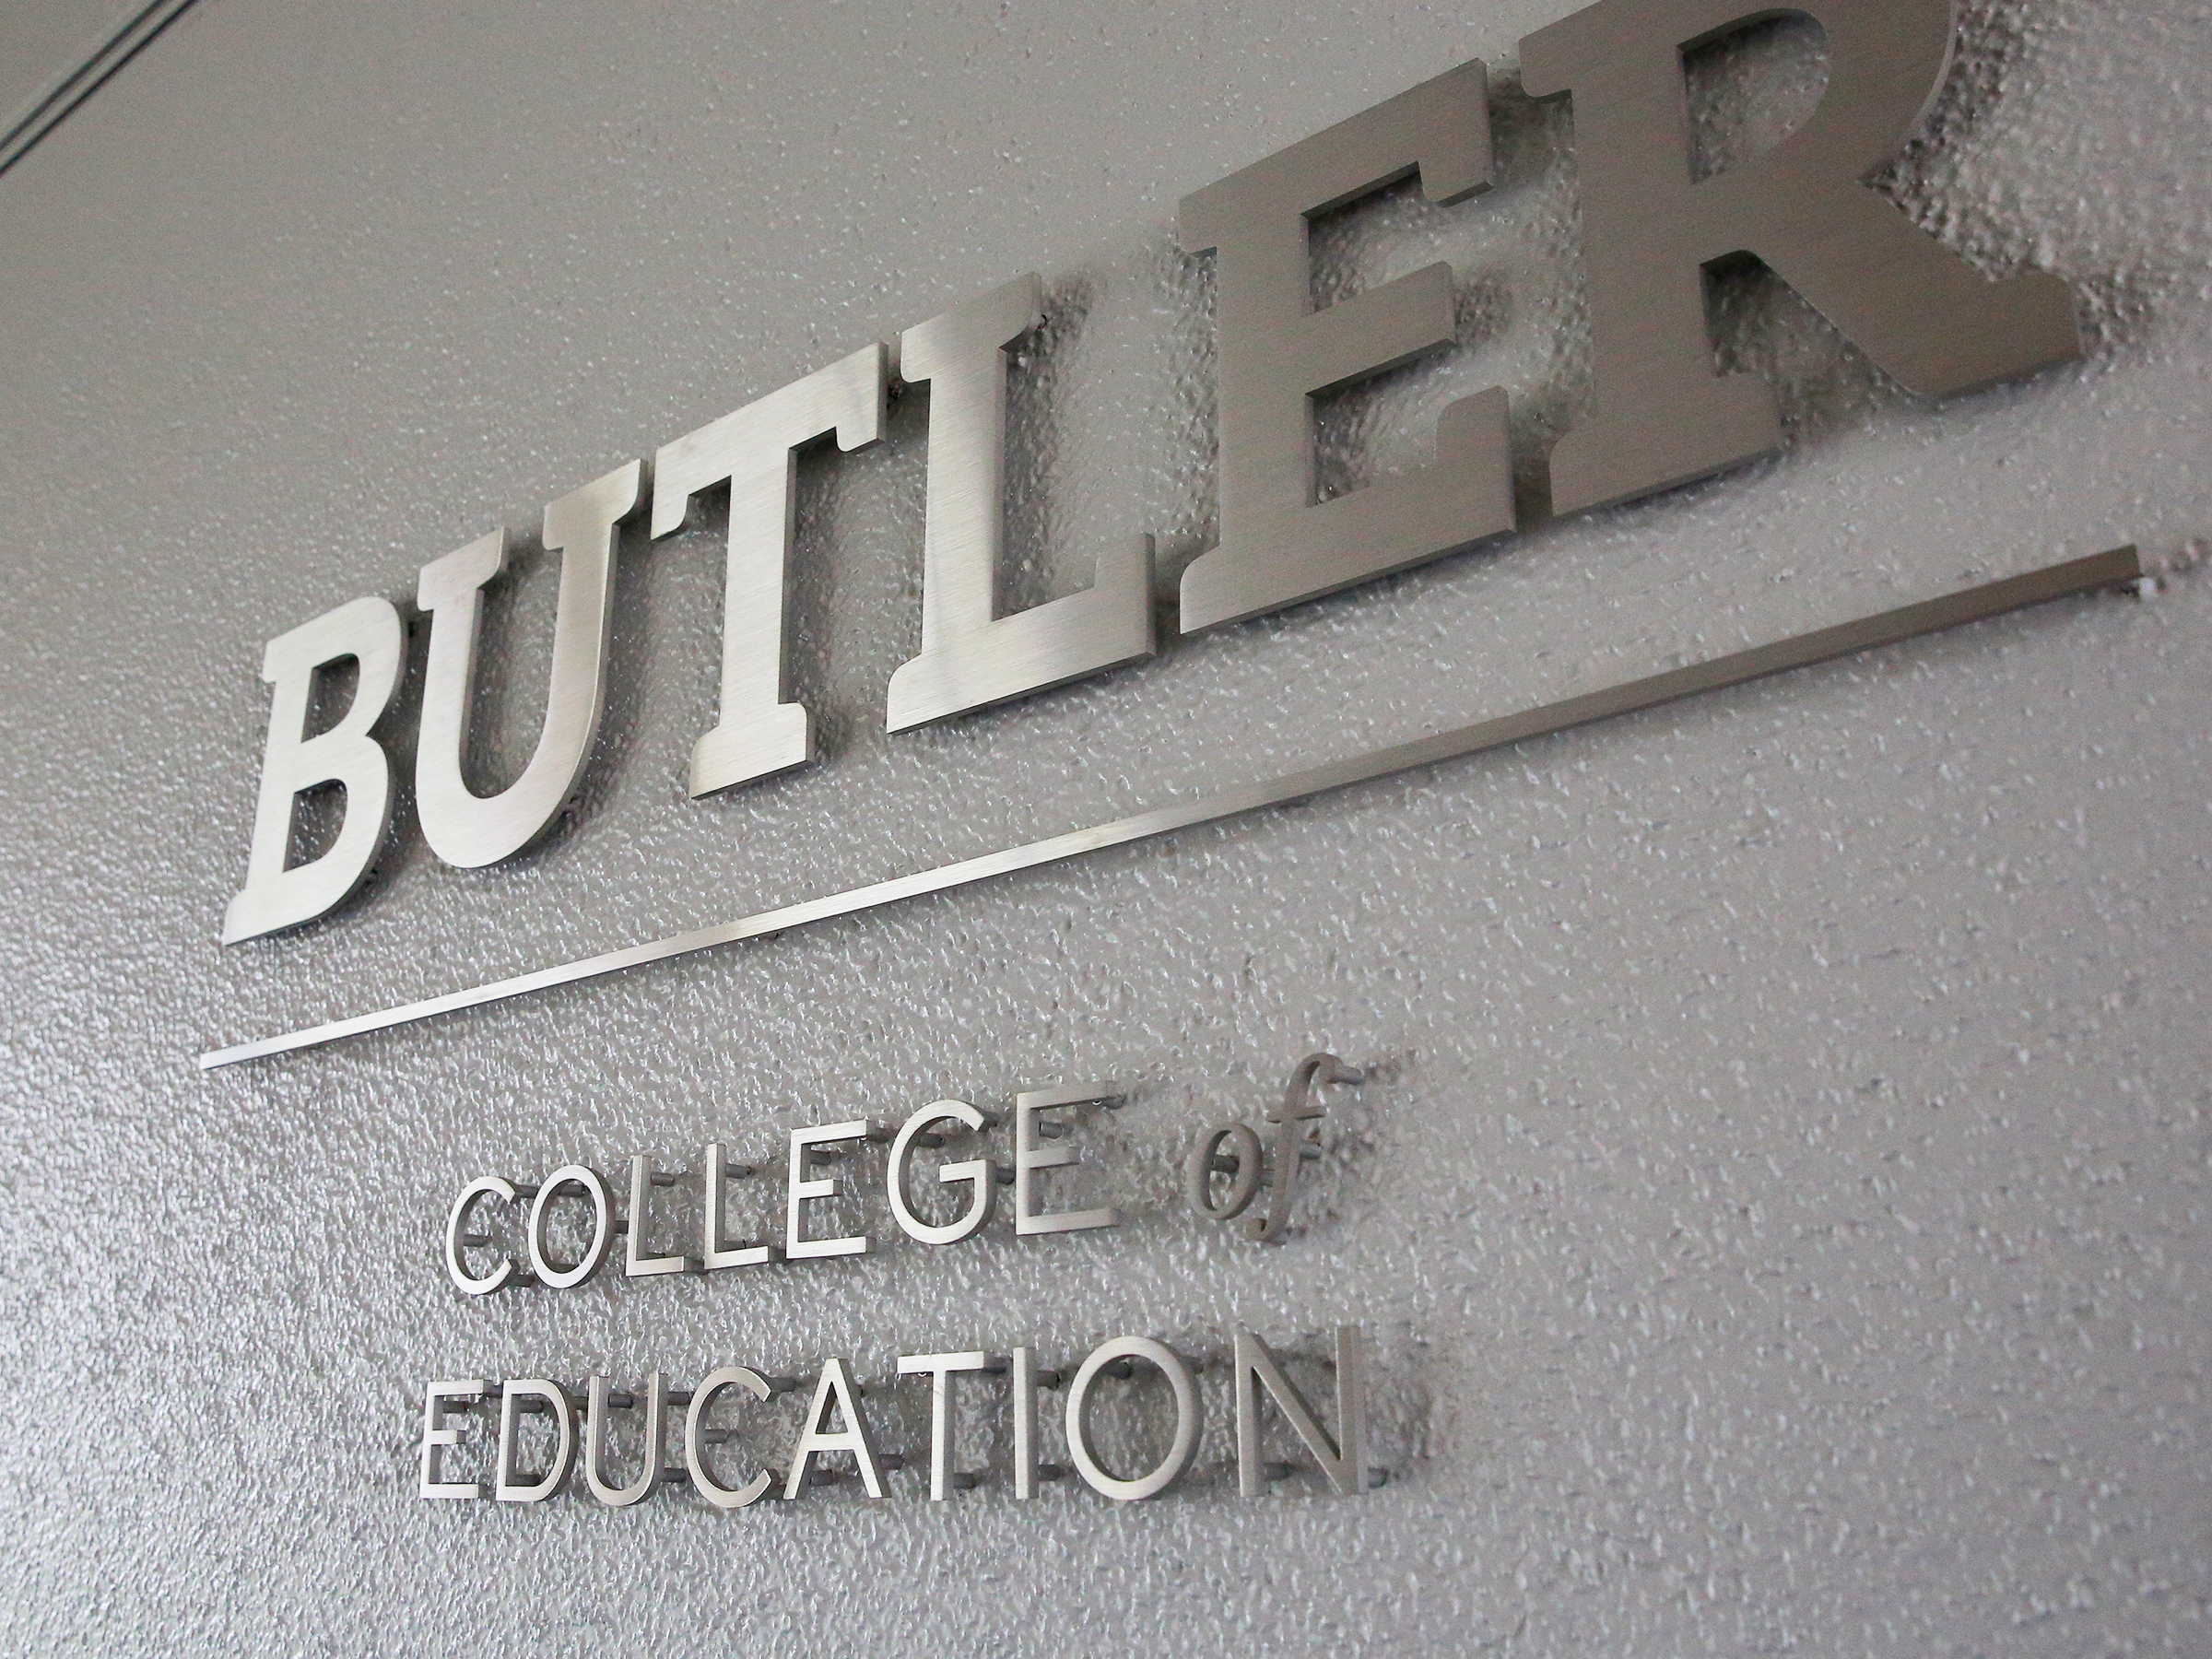 Butler College of Education sign